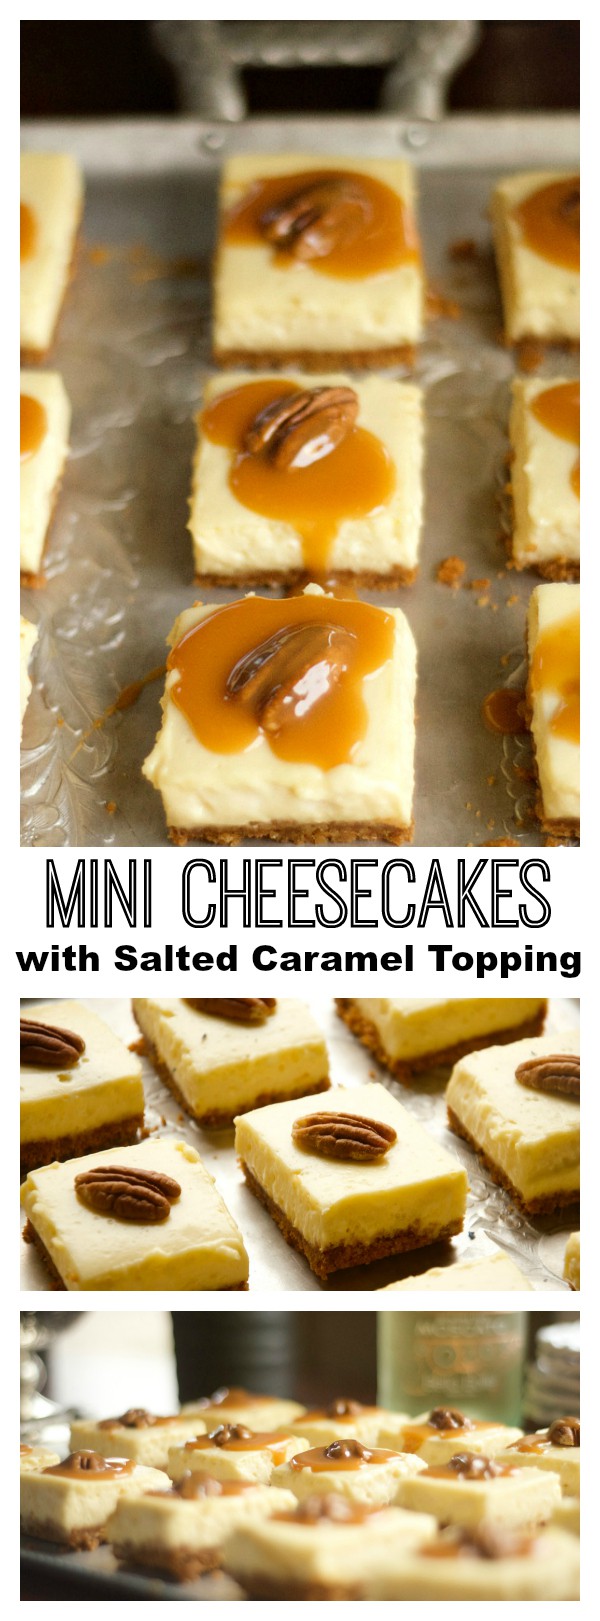 Mini Cheesecakes with Salted Caramel Topping